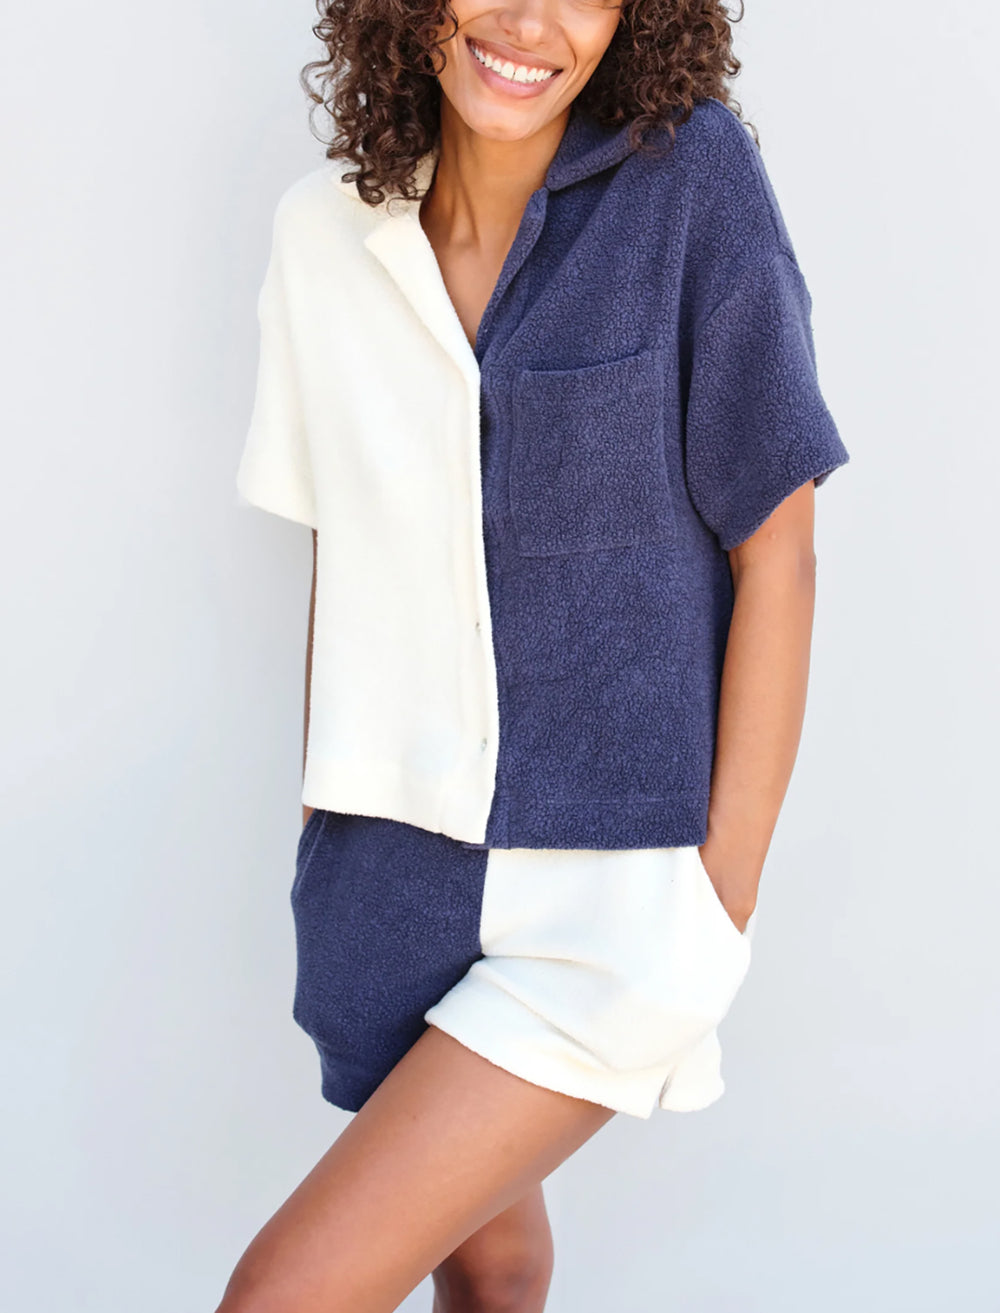 Model wearing Sundry's sherpa pull-on shorts in cream and navy.